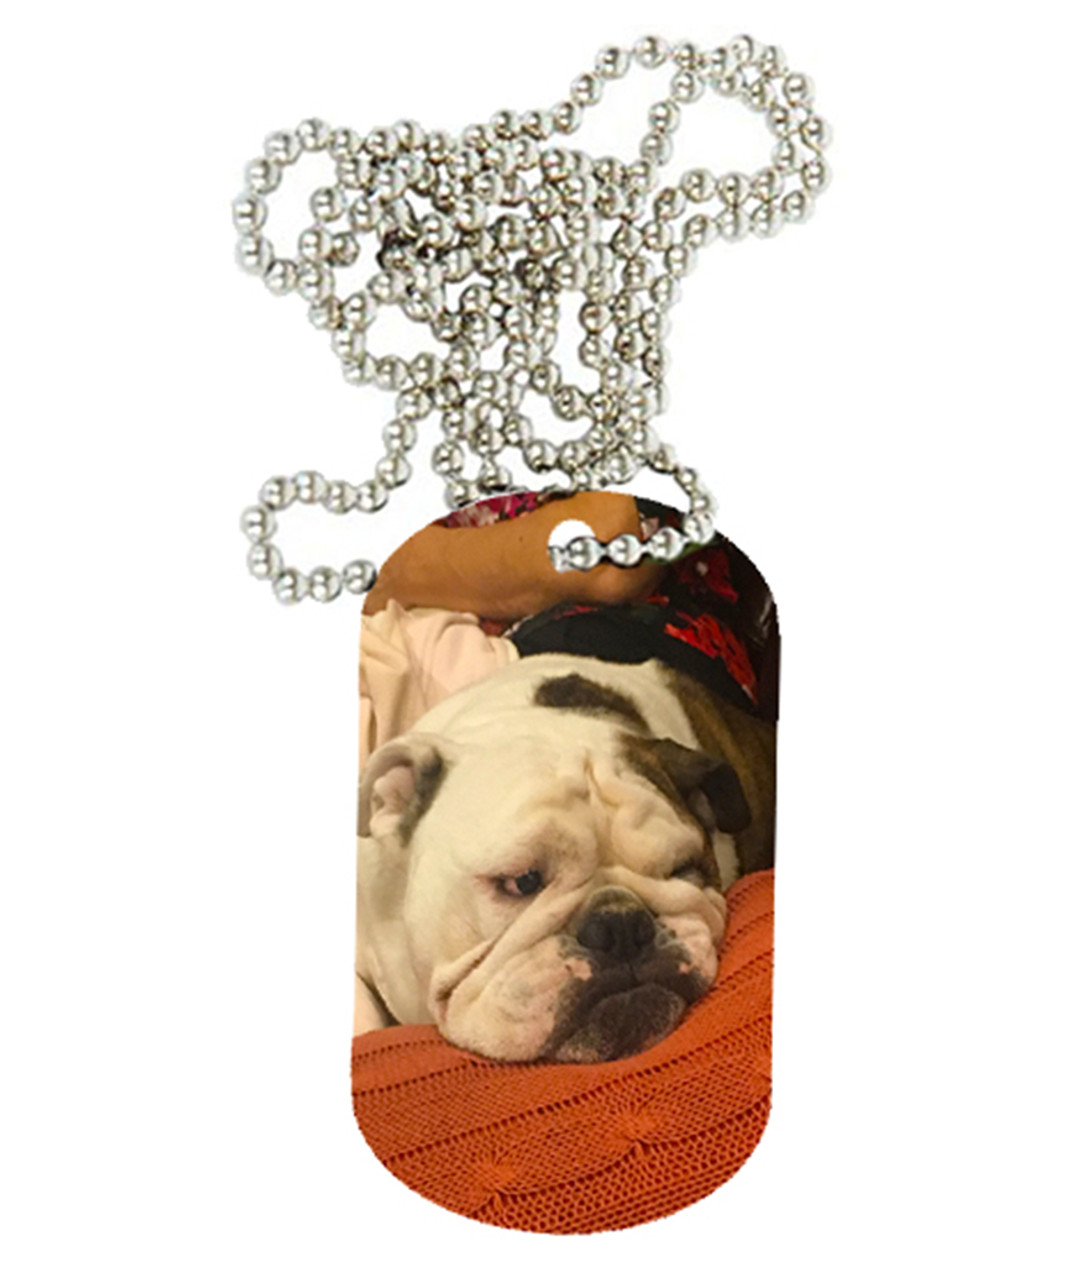 Two Sided Emergency Contact Dog Tag